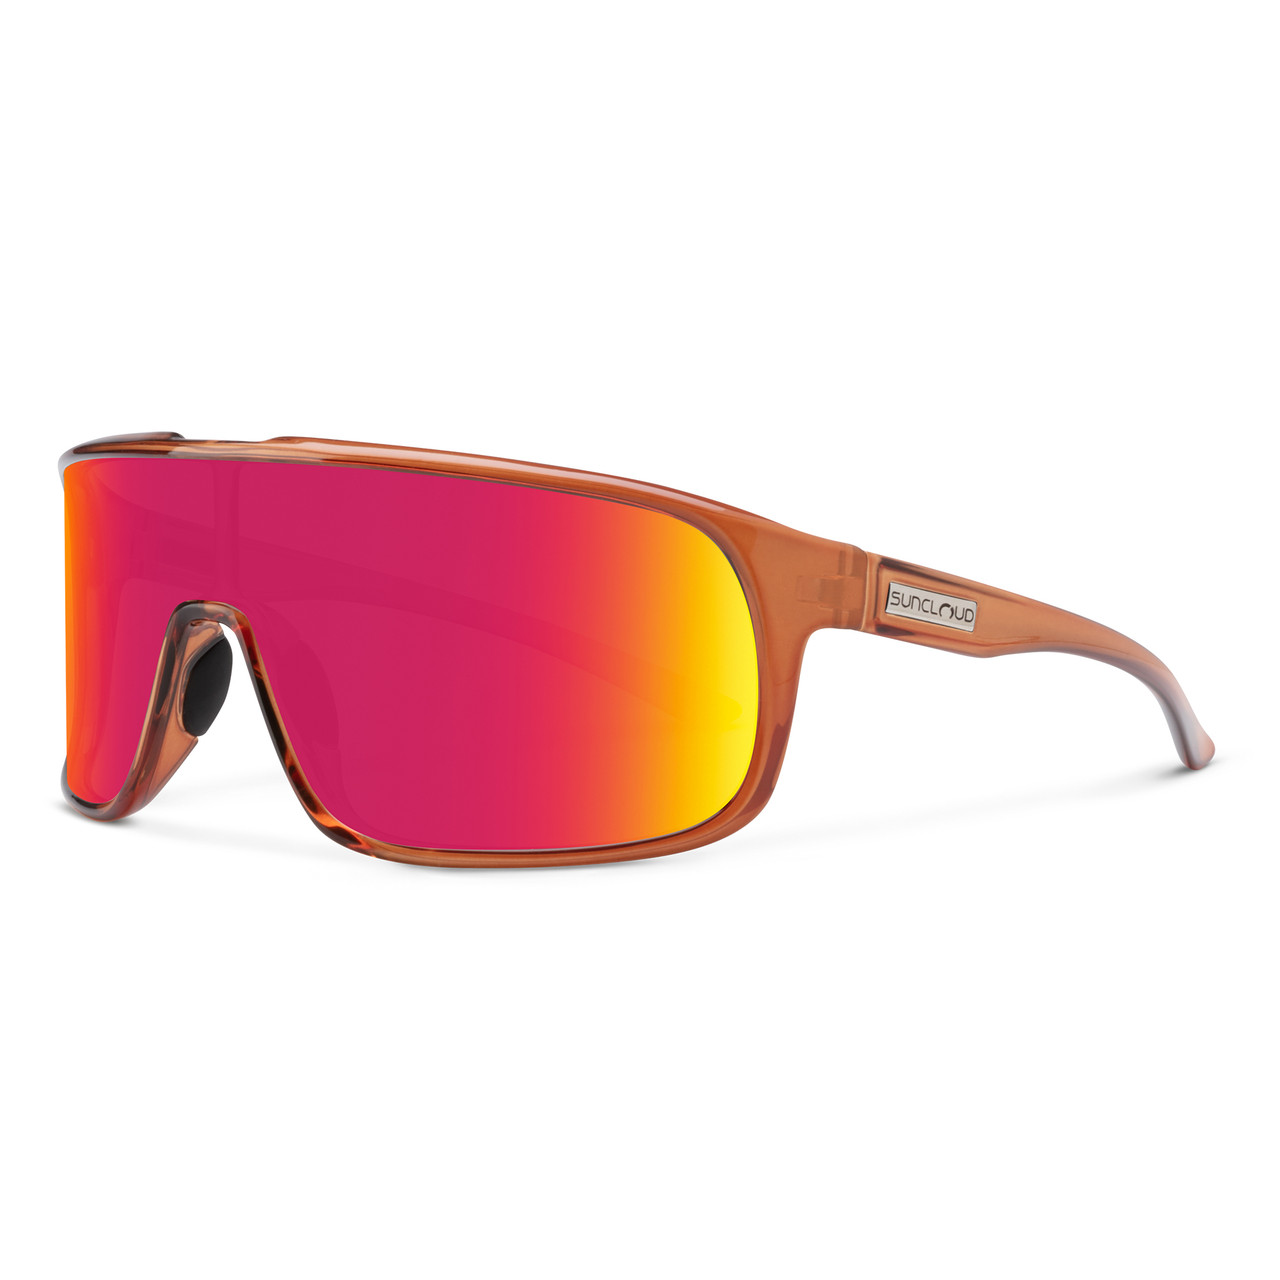 Profile View of Suncloud Double Up Pit Viper Style Full Rim Sport Shield Sunglasses in Matte Crystal Amber with Polar Red Mirror